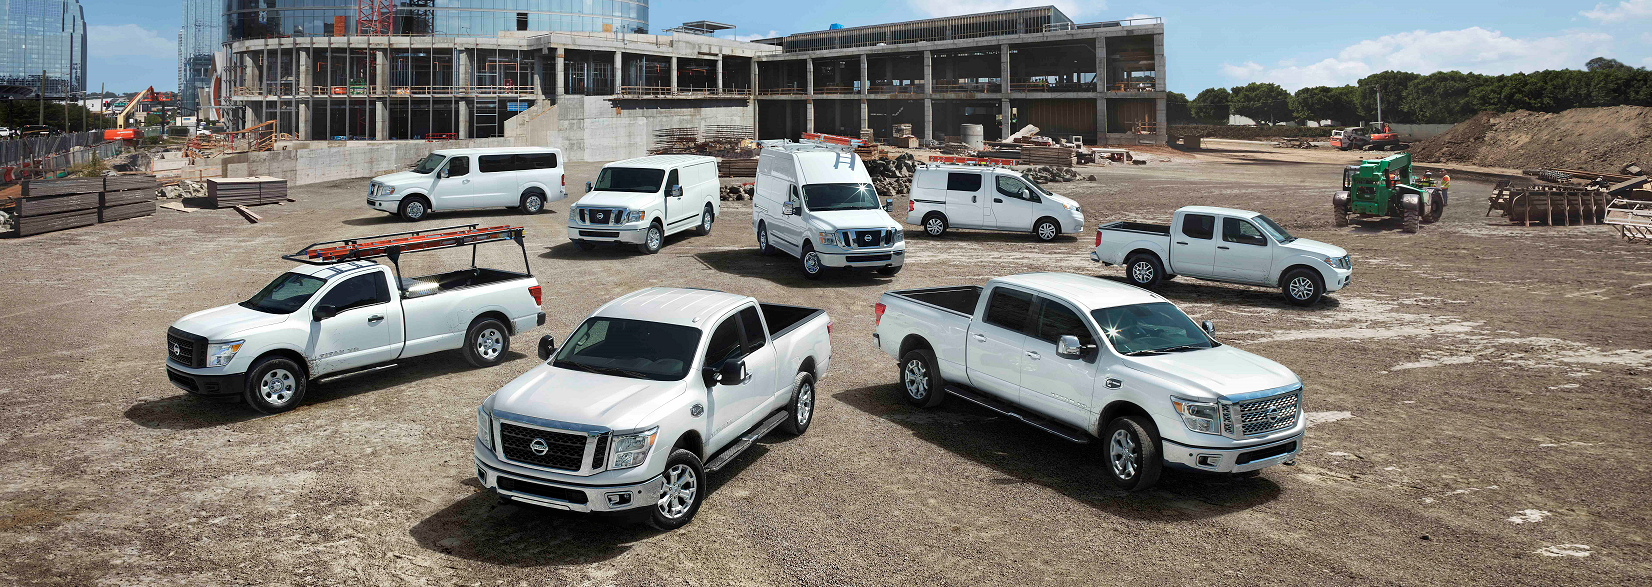 Nissan Commercial Vehicles Indianapolis IN